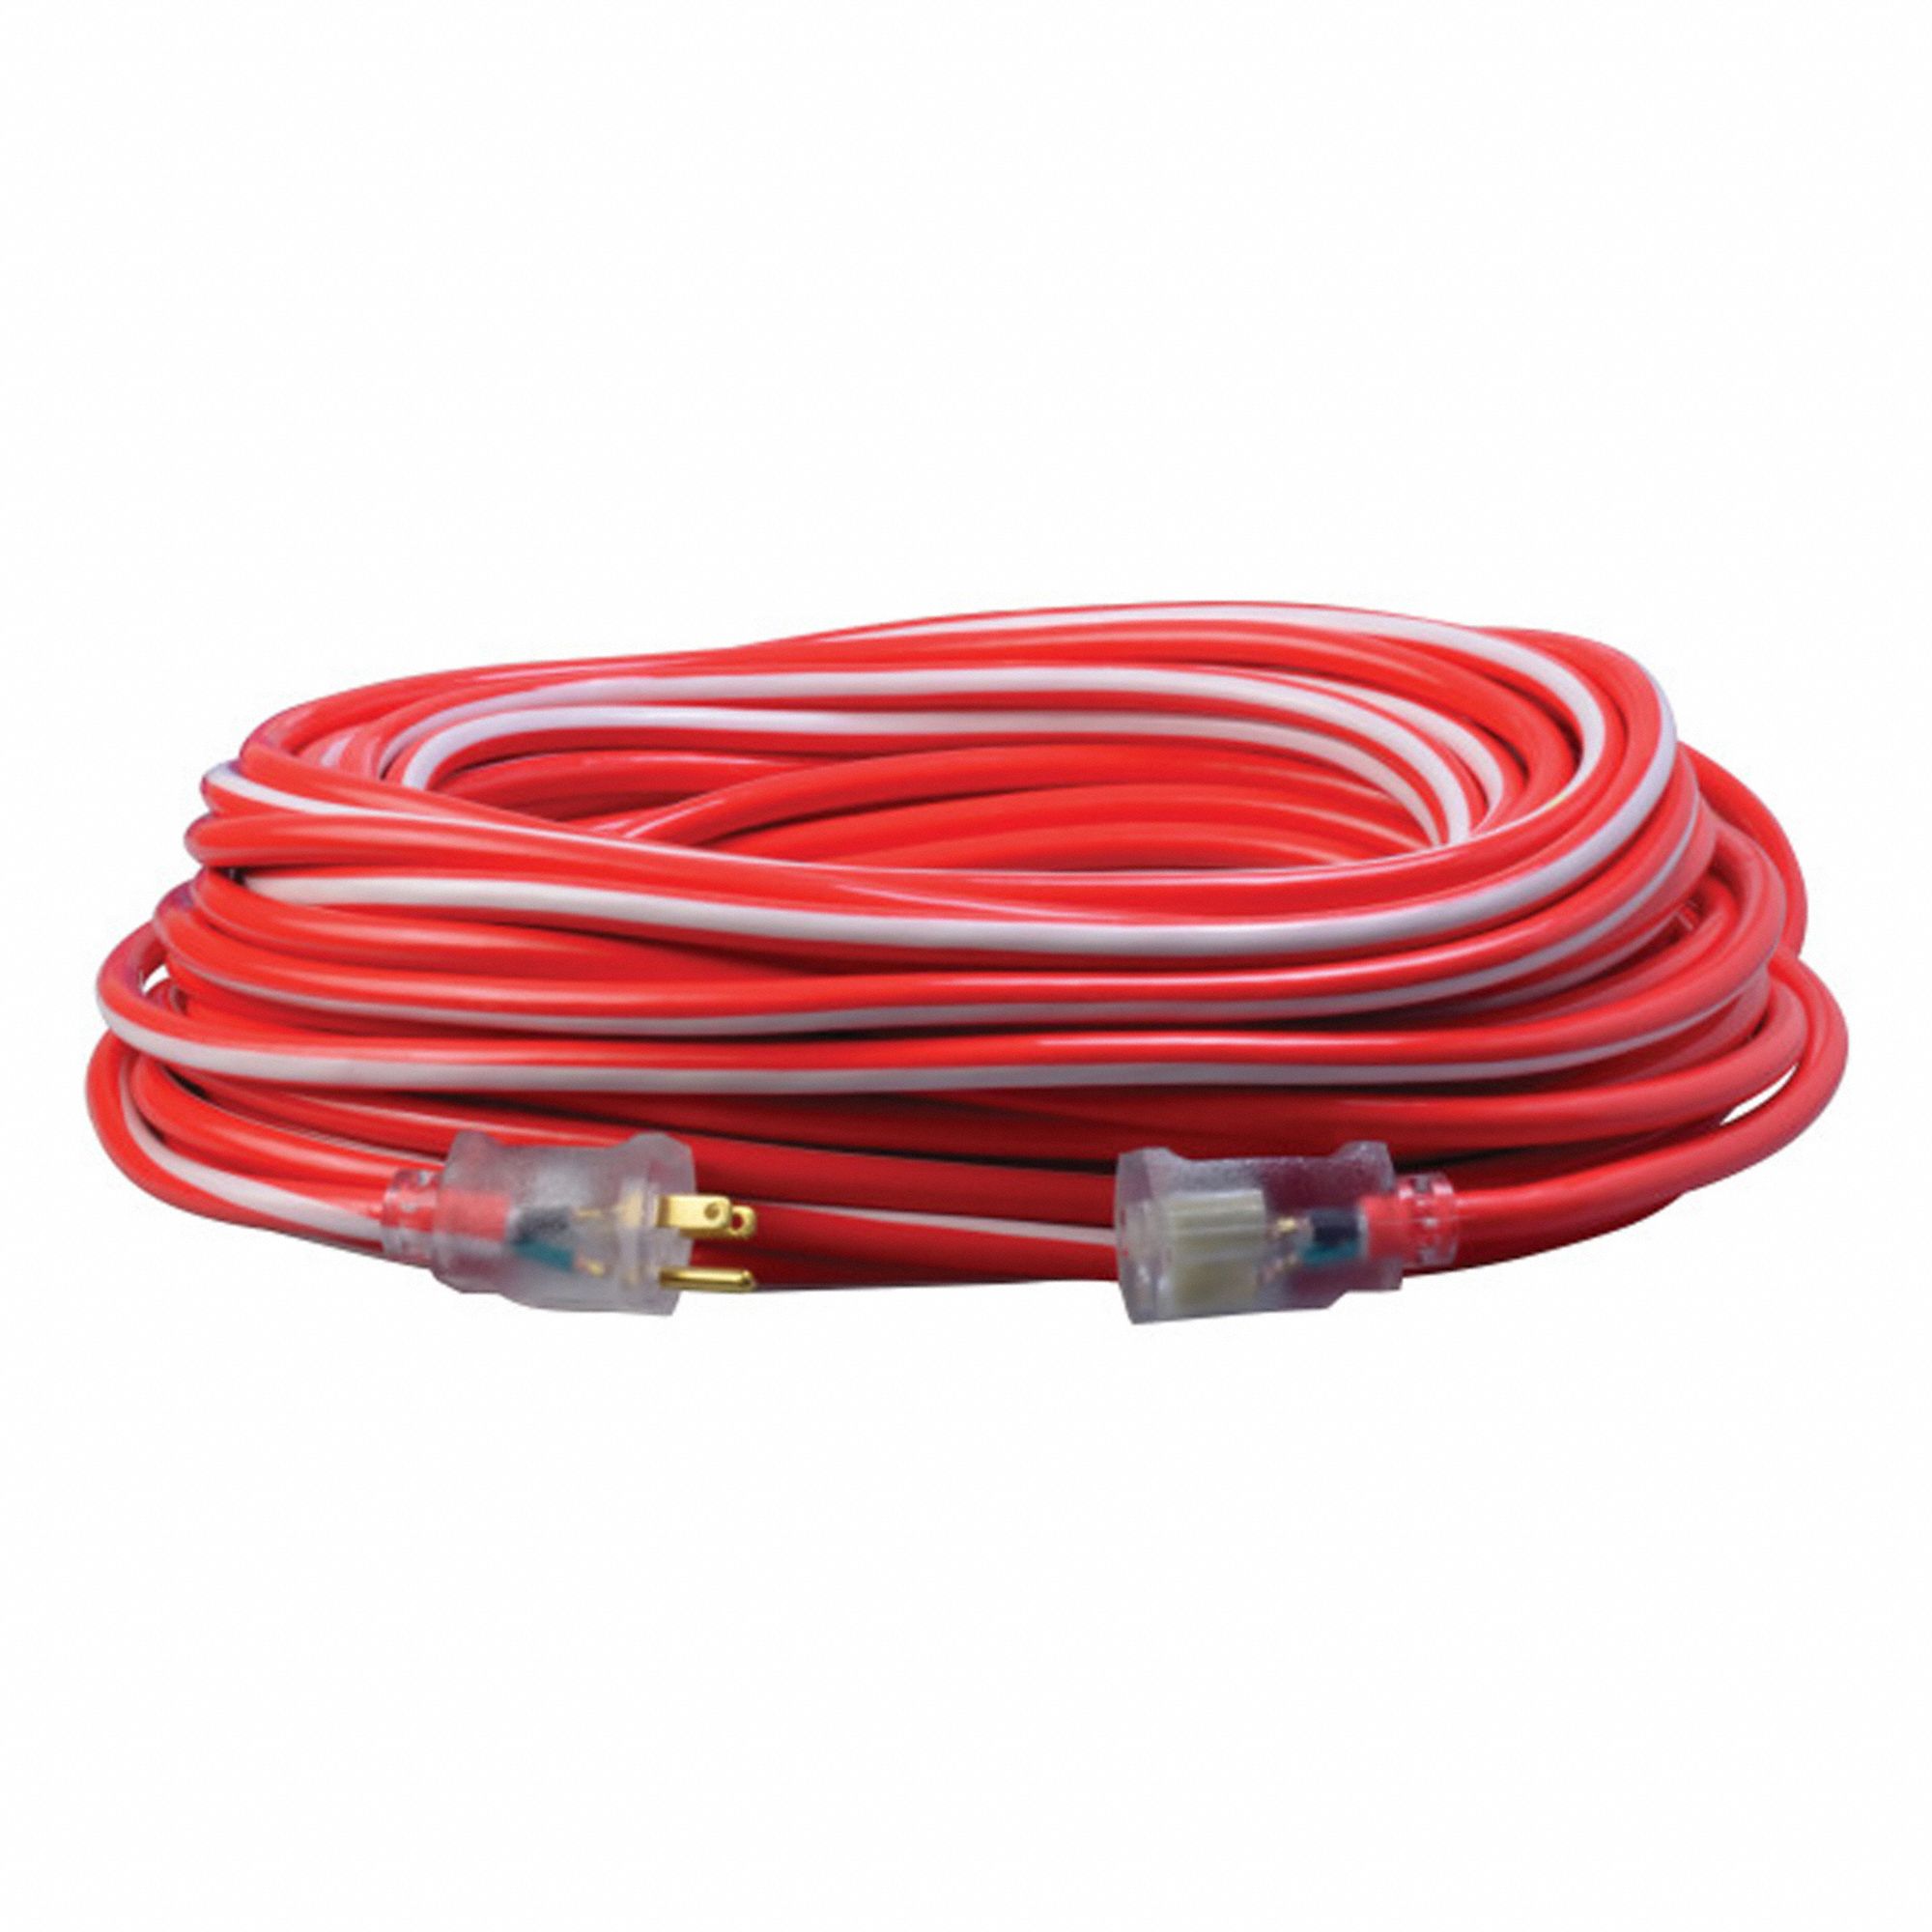 WOODS EXTENSION CORD, 100 FEET, 15 AMPS, 300 VOLTS, SJTW, RED/WHITE - Extension  Cords - WDS025498841